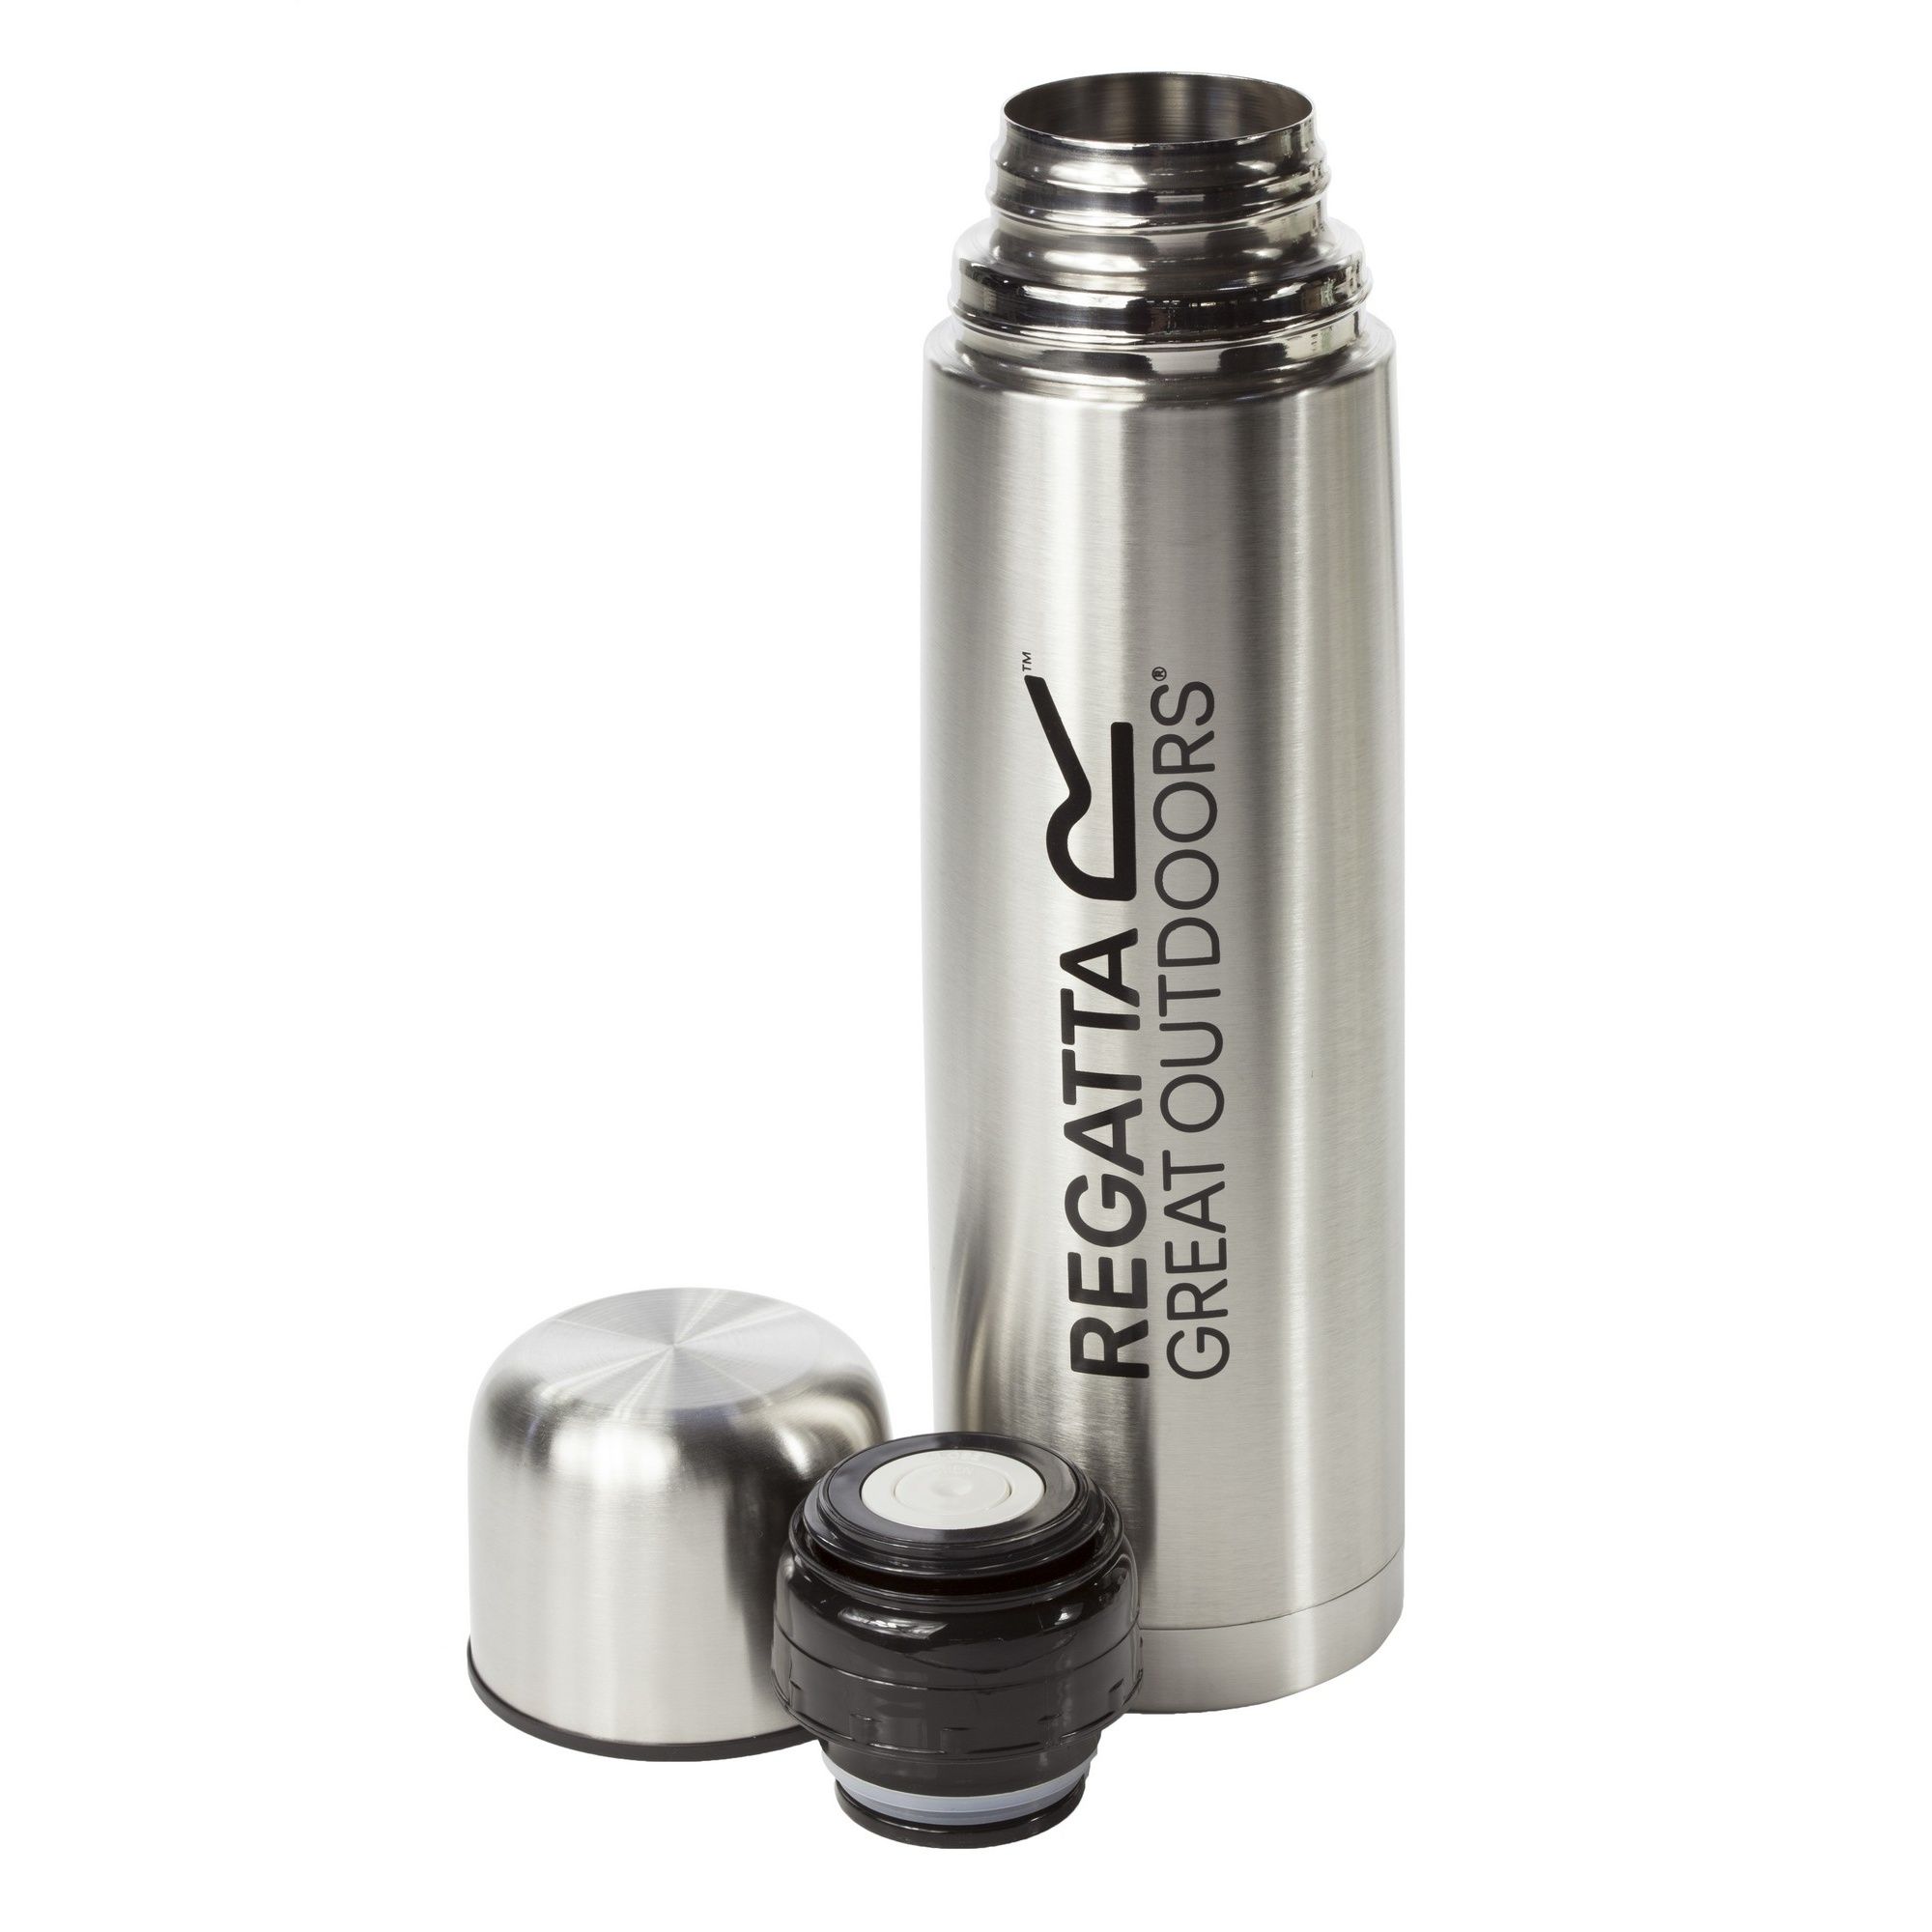 The Regatta 1 litre Vacuum Flask keeps hot drinks hot and cold drinks cold (it does this by creating an airless vacuum space between the two walls). Perfect for a mid-walk cup of tea. 100% Stainless Steel.